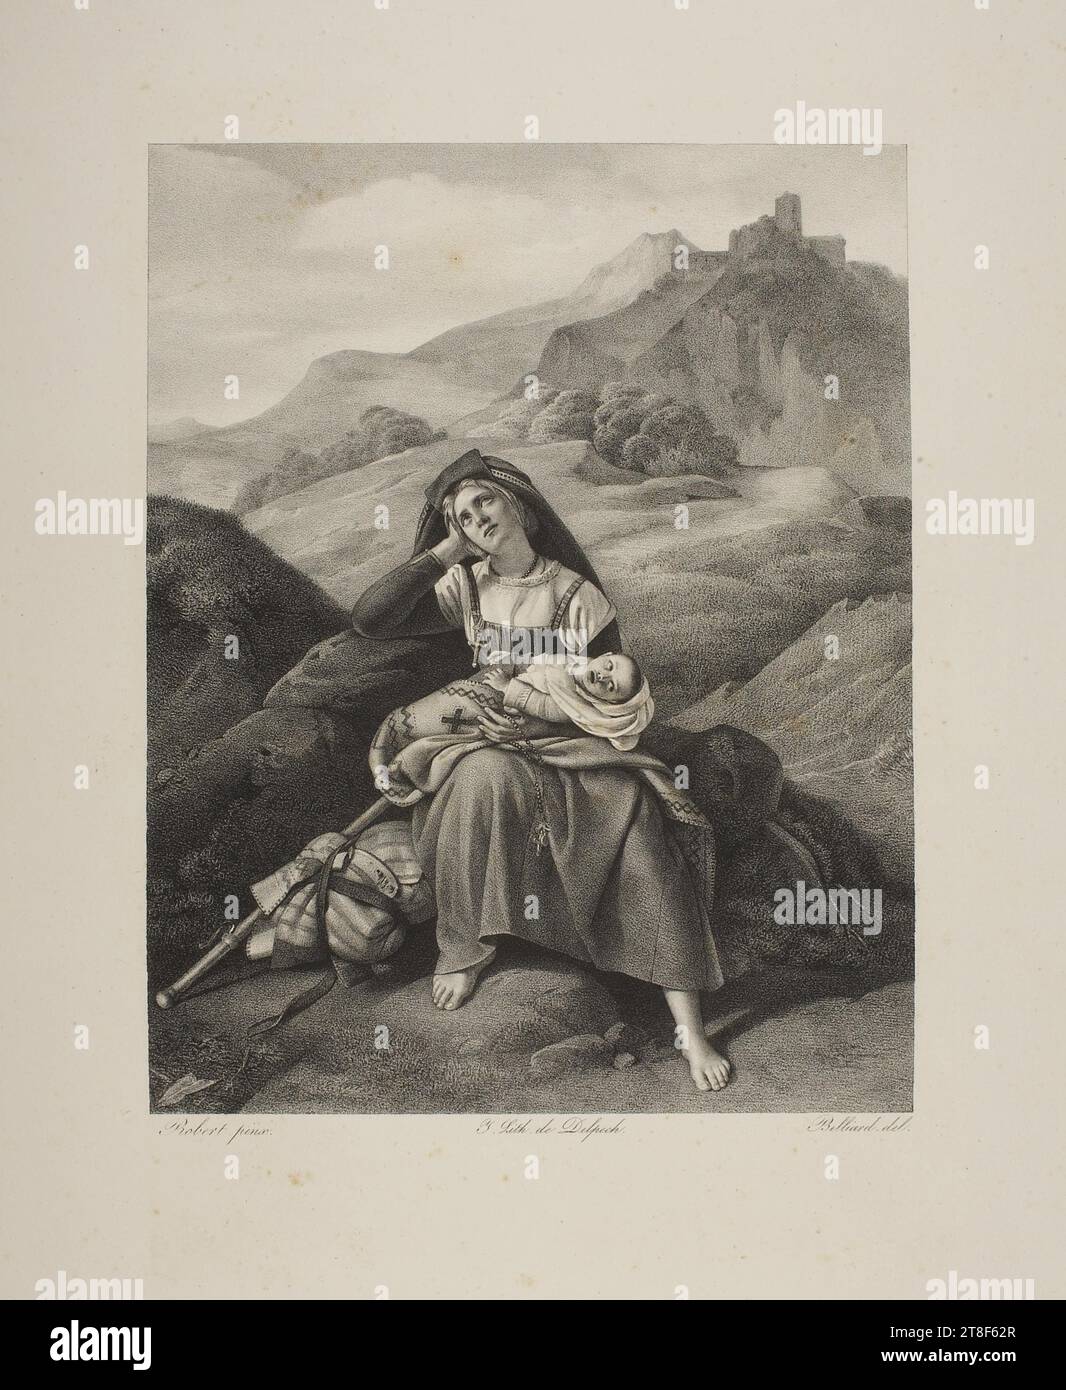 Italien Farmer Woman Invokes Heavenly Assistance to Her Child, Zéphirin Félix Jean Marius Belliard, No later than 1861, Graphic Art, Lithograph, Paper, Color, Printer's ink, Lithography, Printet, Height (sight size) 305 mm, Height (plate size) 280 mm, Height (passepartout) 650 mm, Height (paper size) 510 mm, Width (plate size) 219 mm, Width (passepartout) 500 mm, Width (paper size) 345 mm, Width (sight size) 240 mm, Robert pinx., I Lith. de Delpech, Belliard del., Graphic Design, European Stock Photo